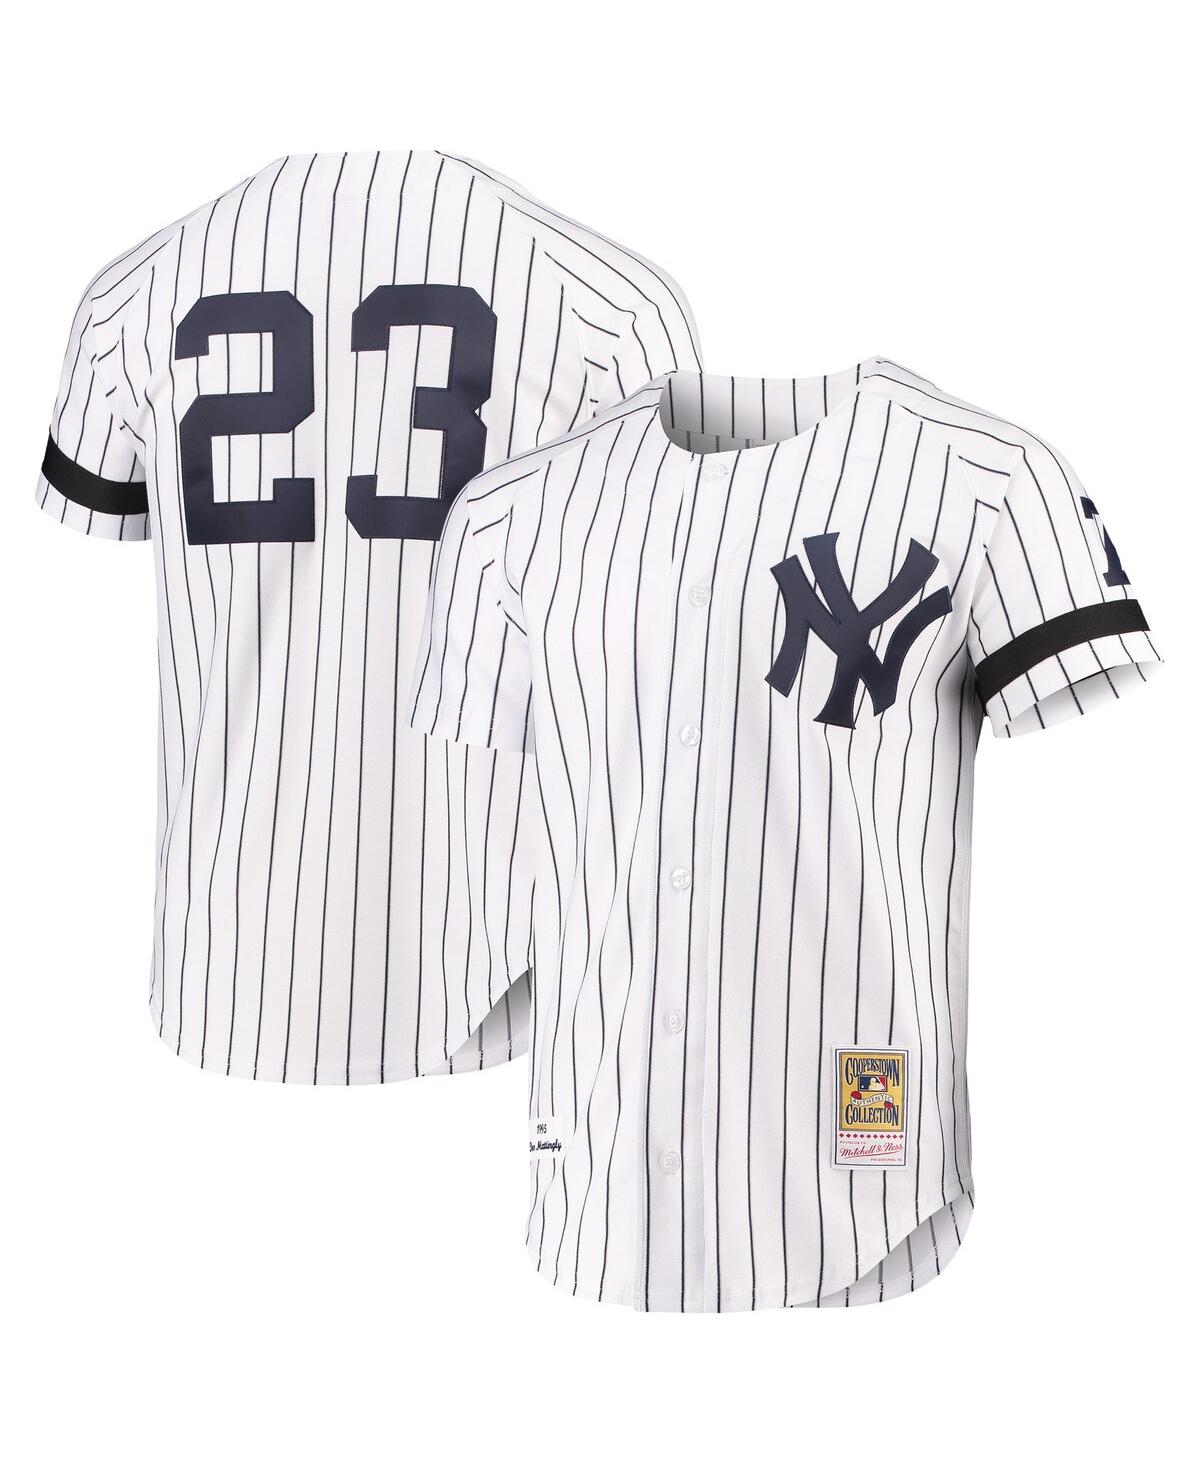 Men's Don Mattingly New York Yankees Mitchell & Ness Cooperstown Collection Authentic Jersey - White - White